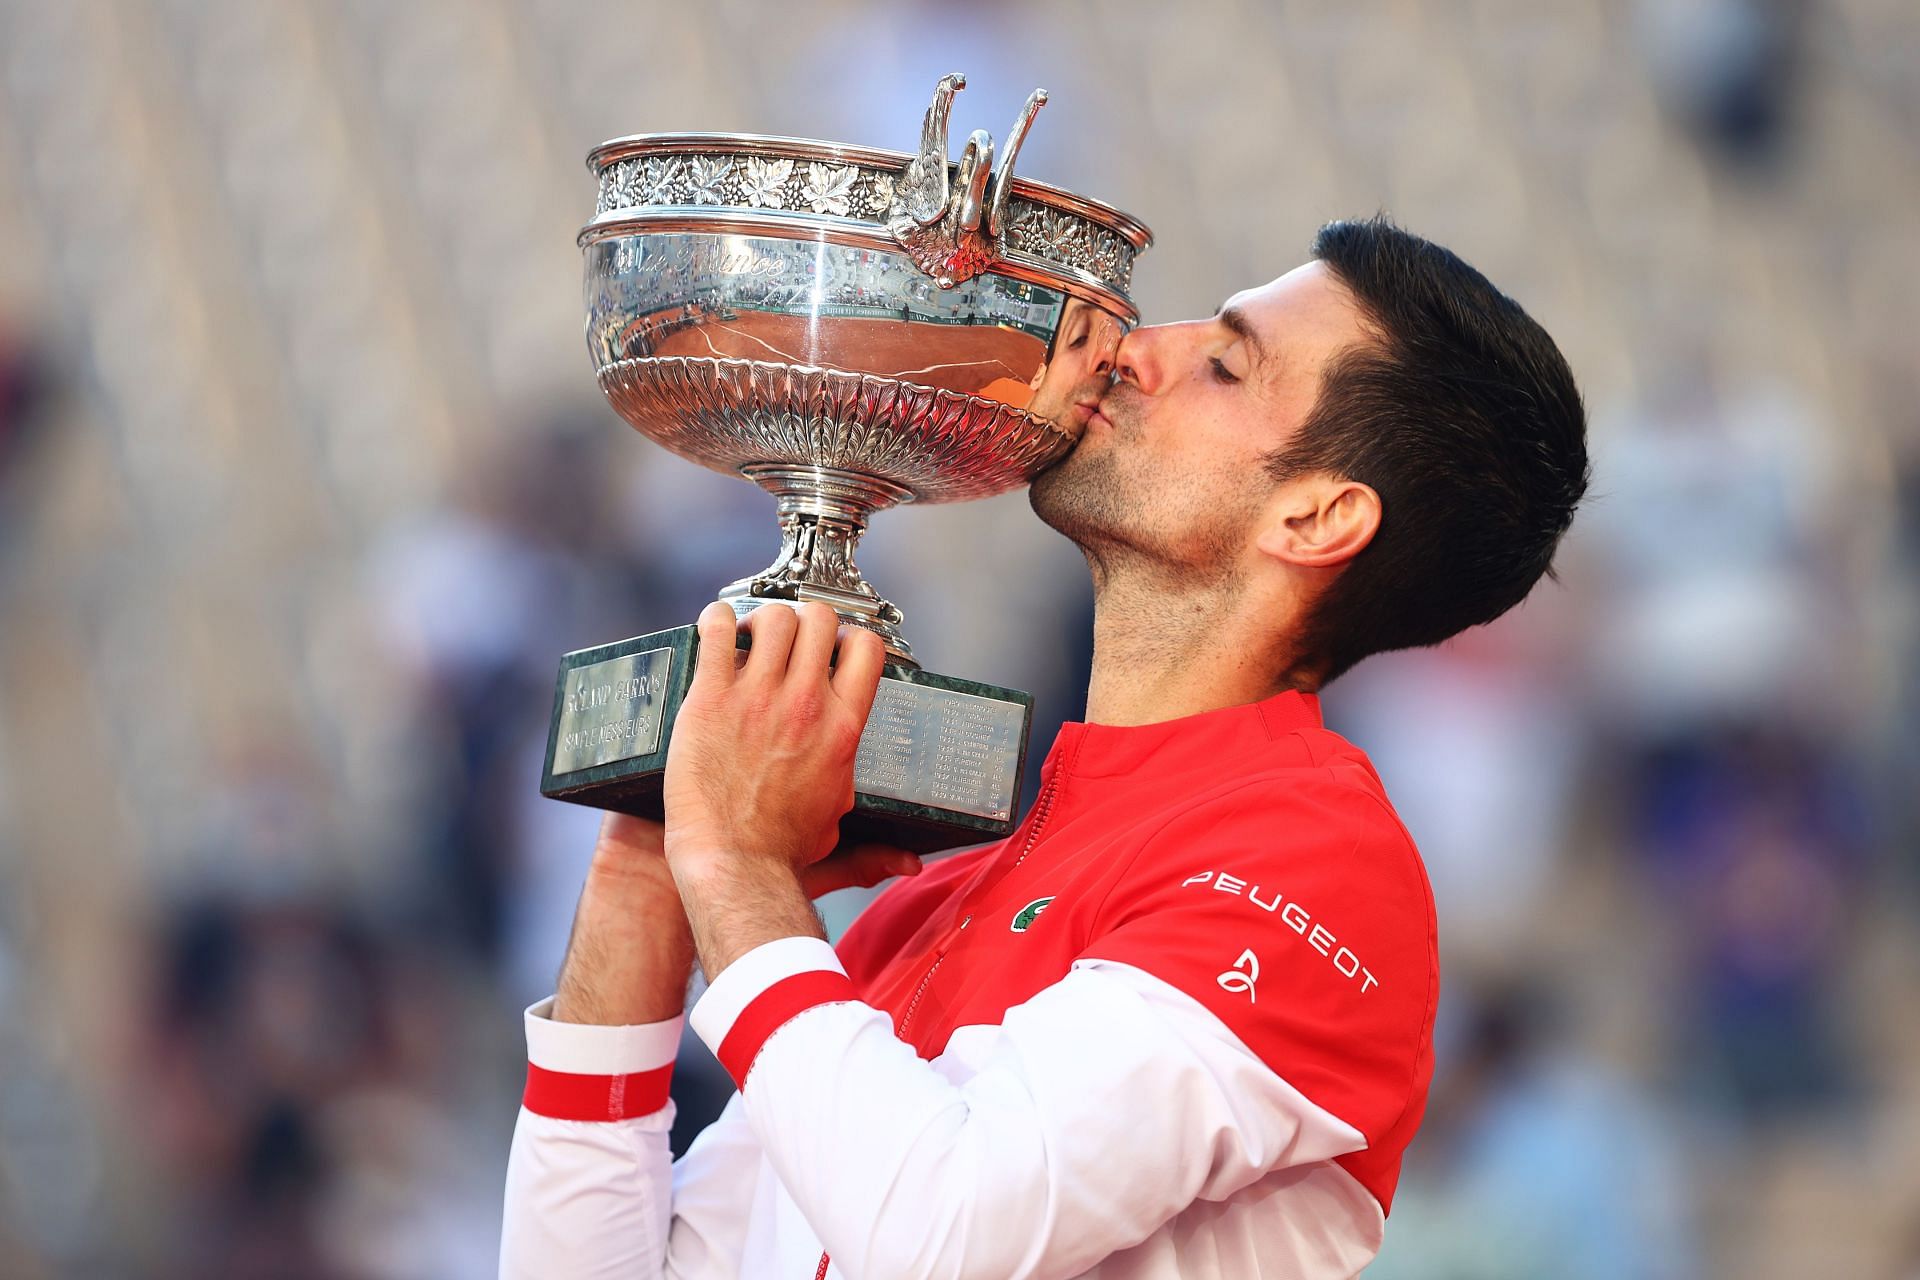 The reigning World No. 1 with his 2021 French Open crown